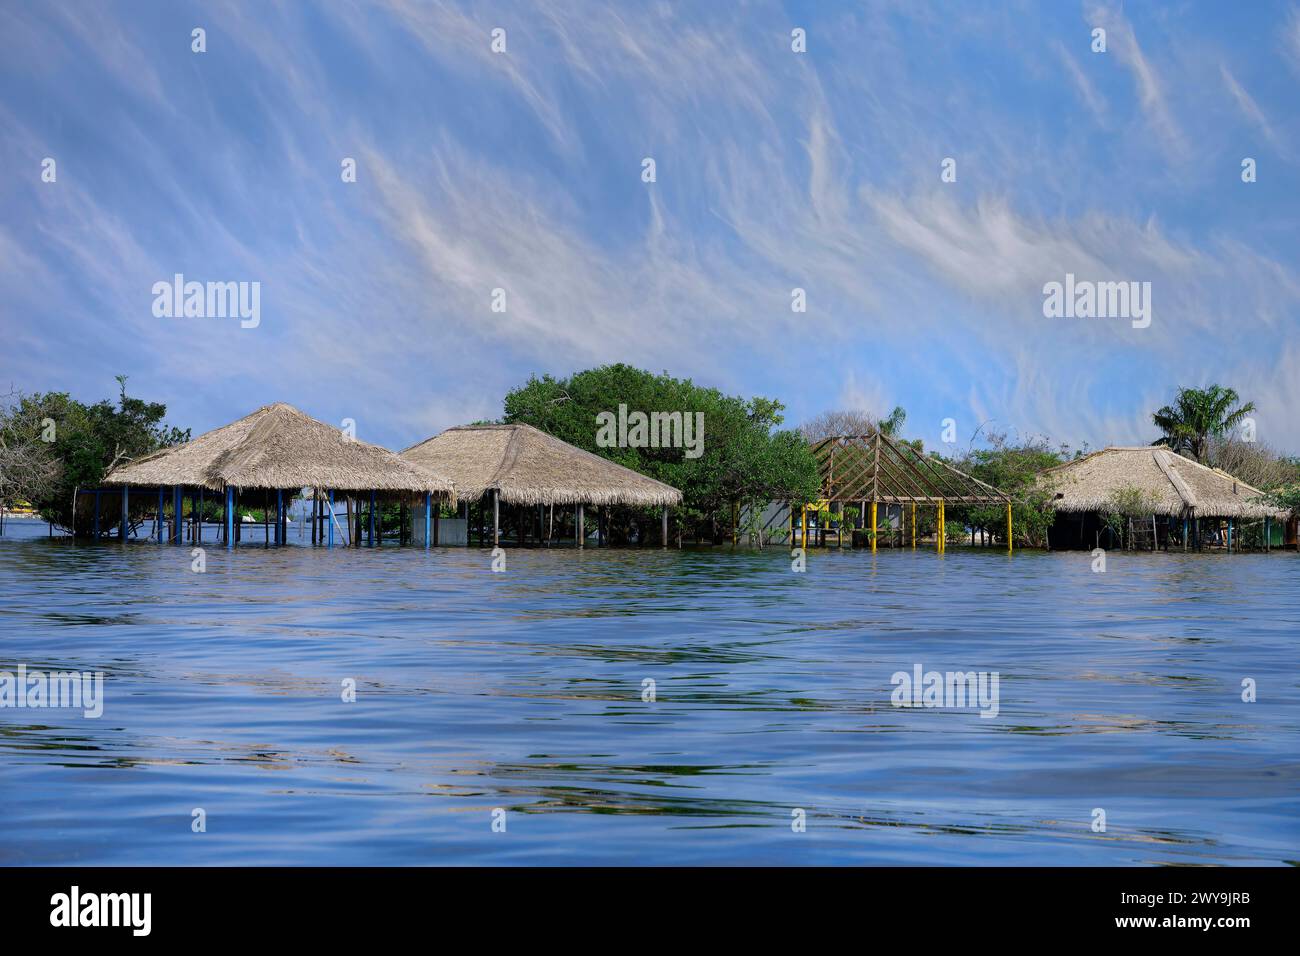 Flooded beach huts, Alter do Chao Beach, Tapajos River, Para state, Brazil, South America Copyright: G&MxTherin-Weise 1131-2005 Stock Photo